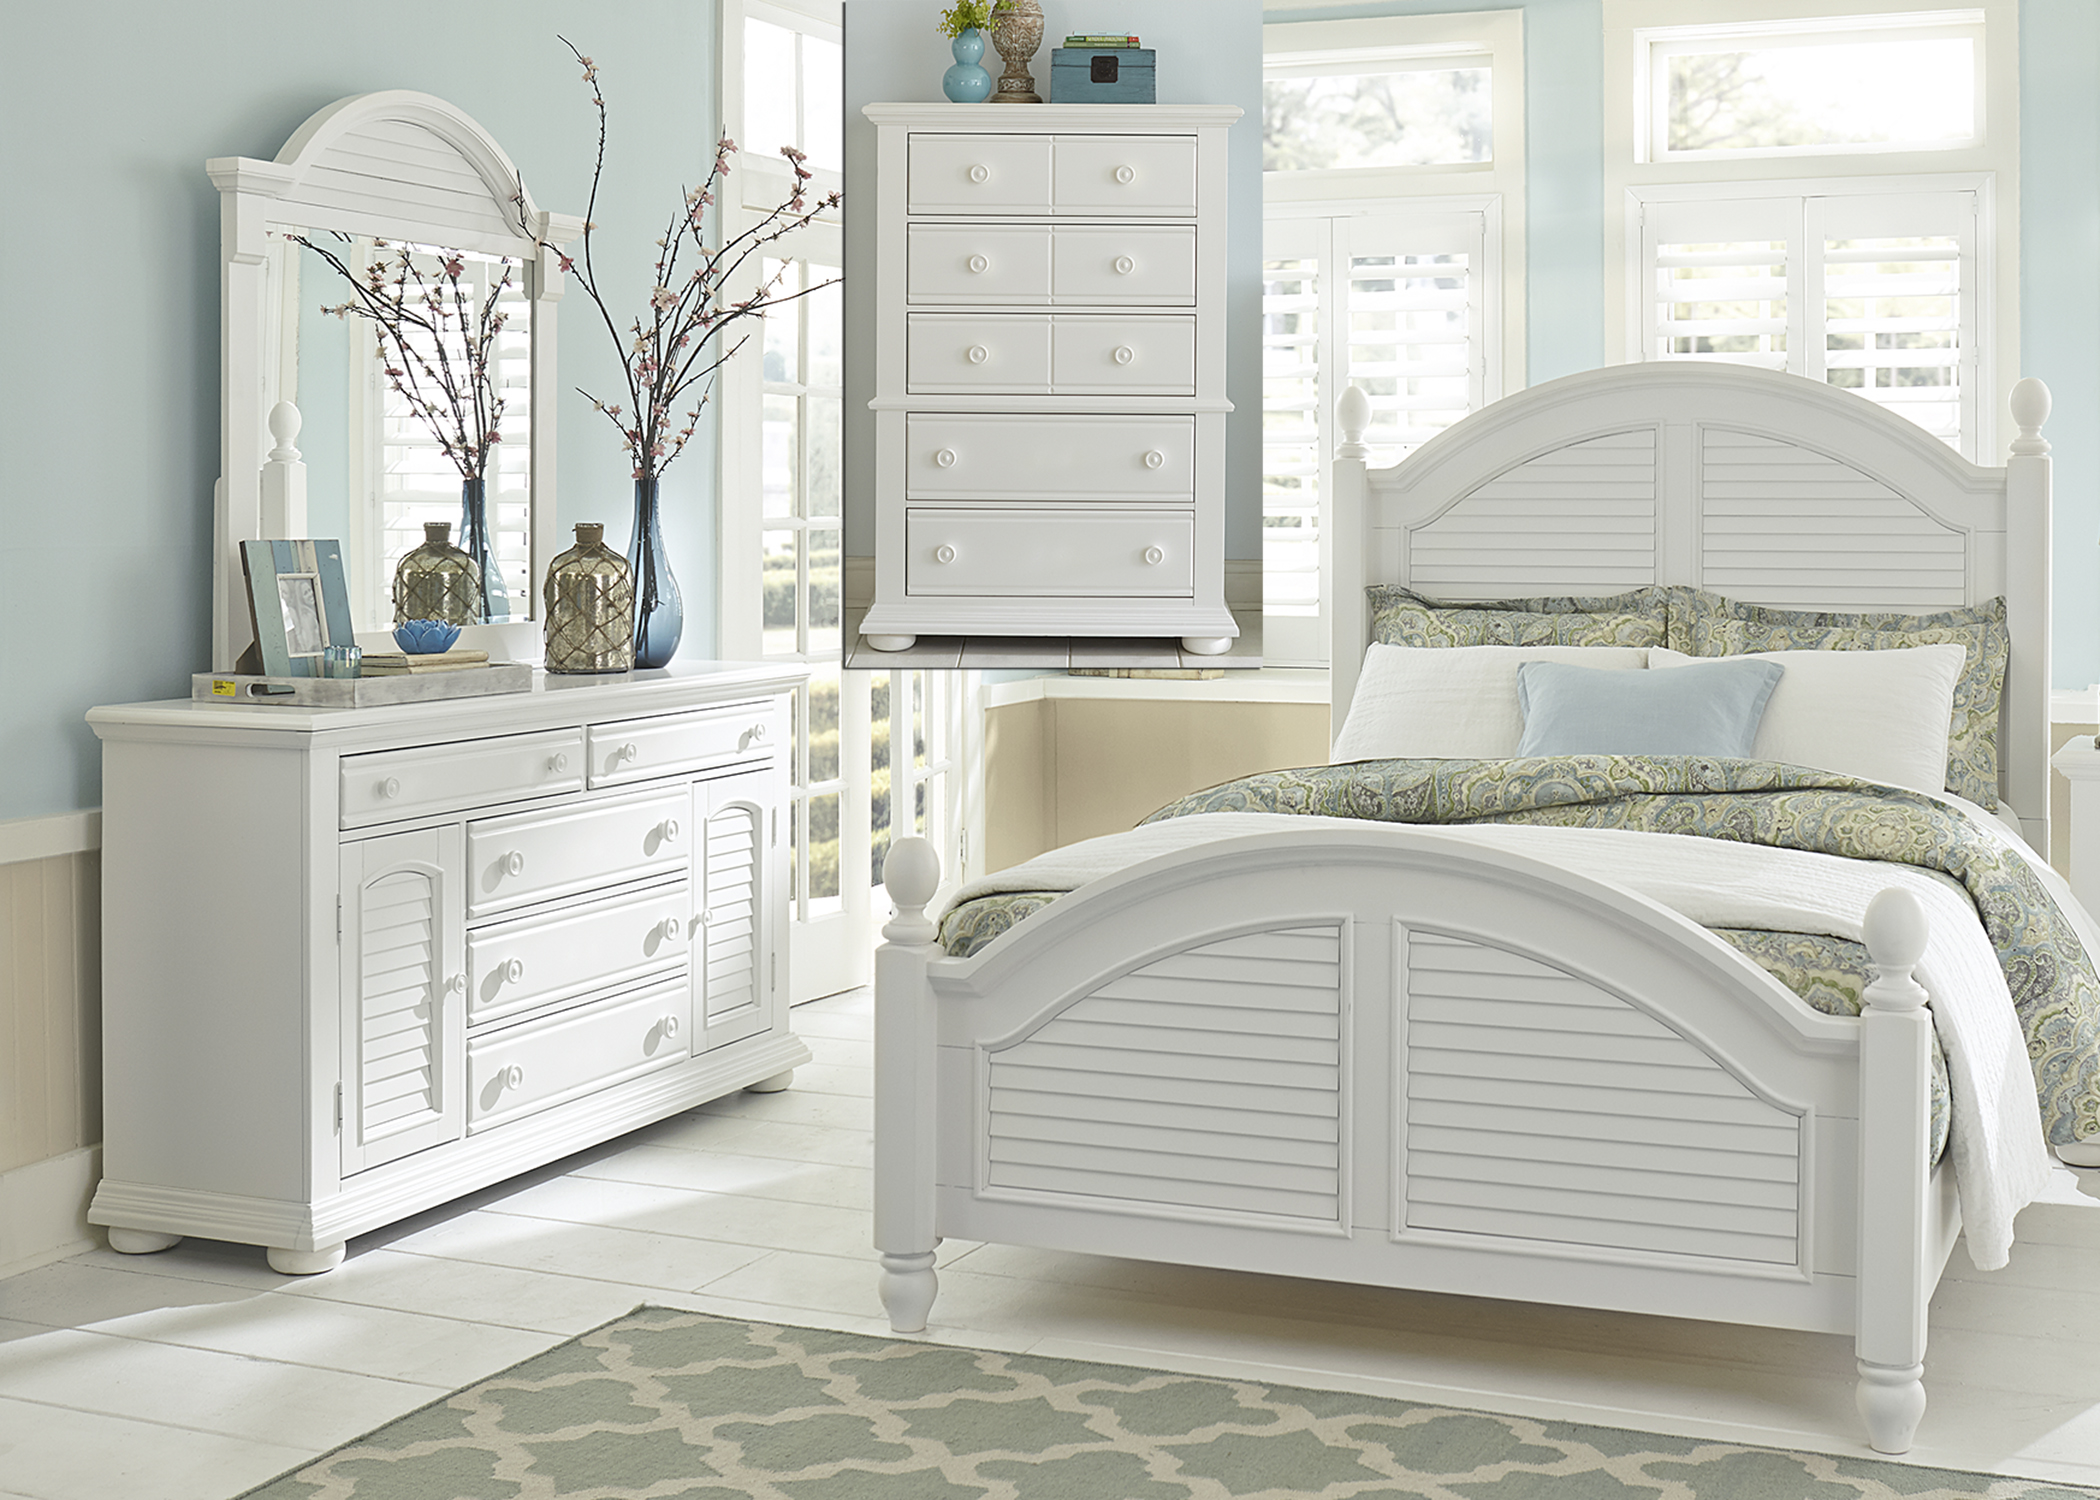 Liberty Furniture Summer House l Bedroom King Poster Bed, Dresser, Mirror and Chest Collection